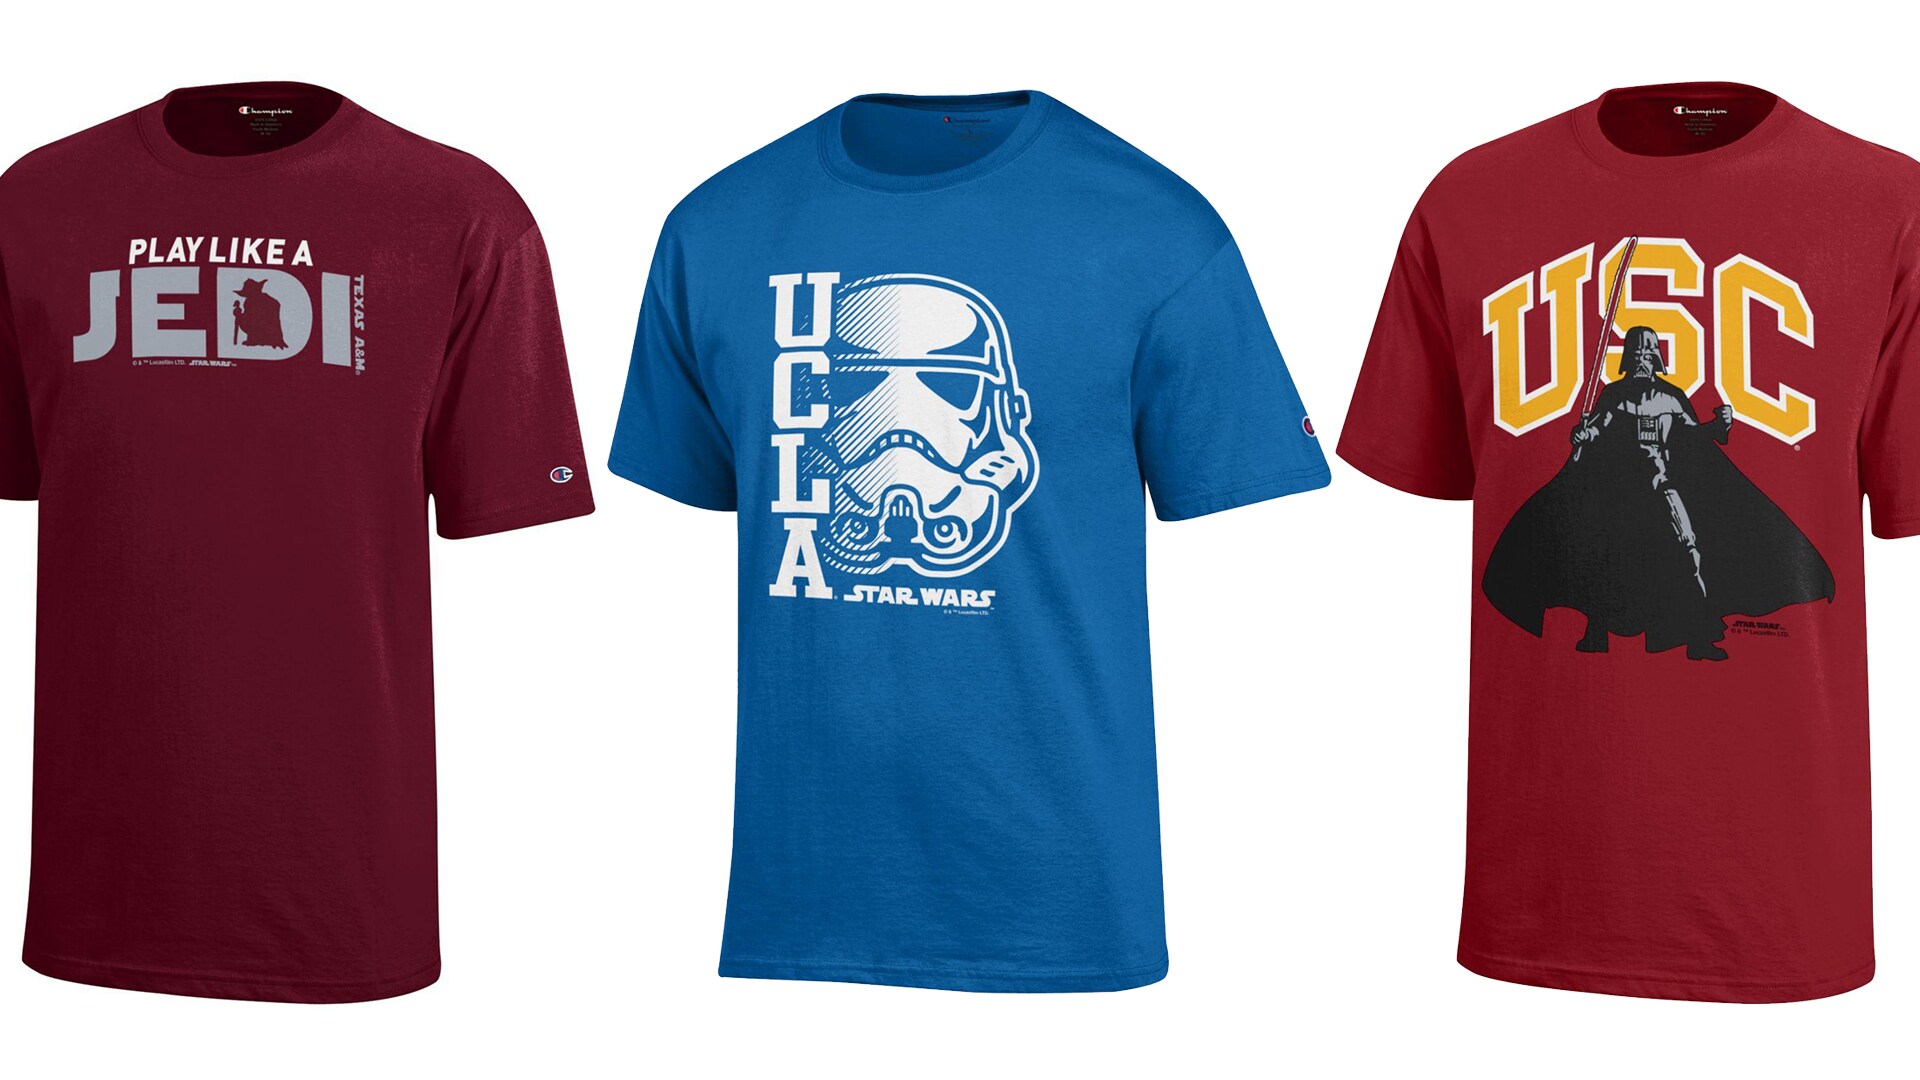 Star Wars Meets College Sports in New Apparel Line